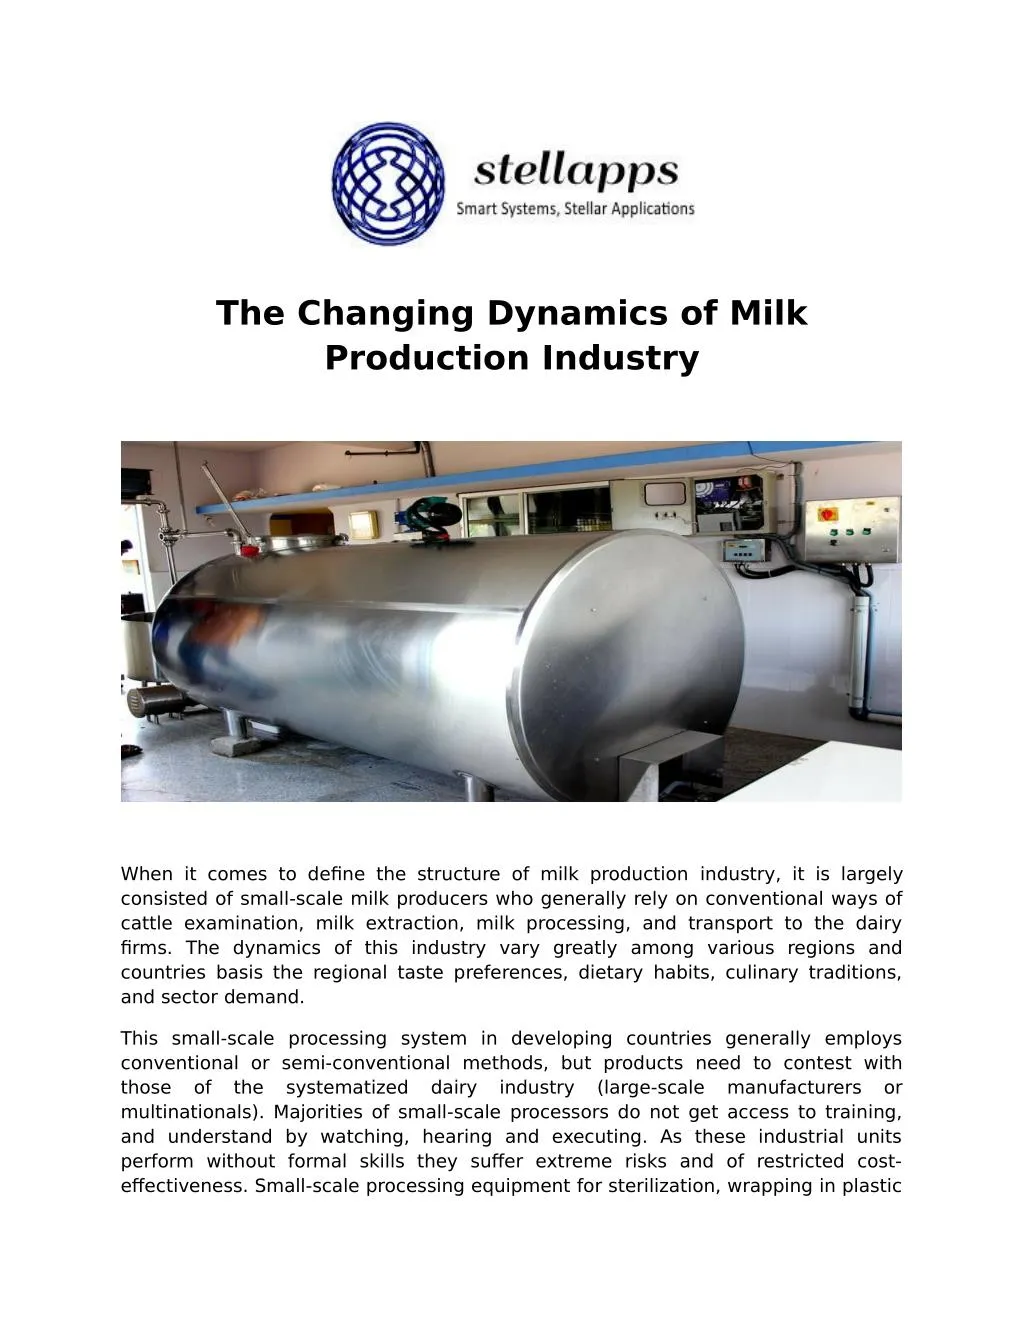 the changing dynamics of milk production industry